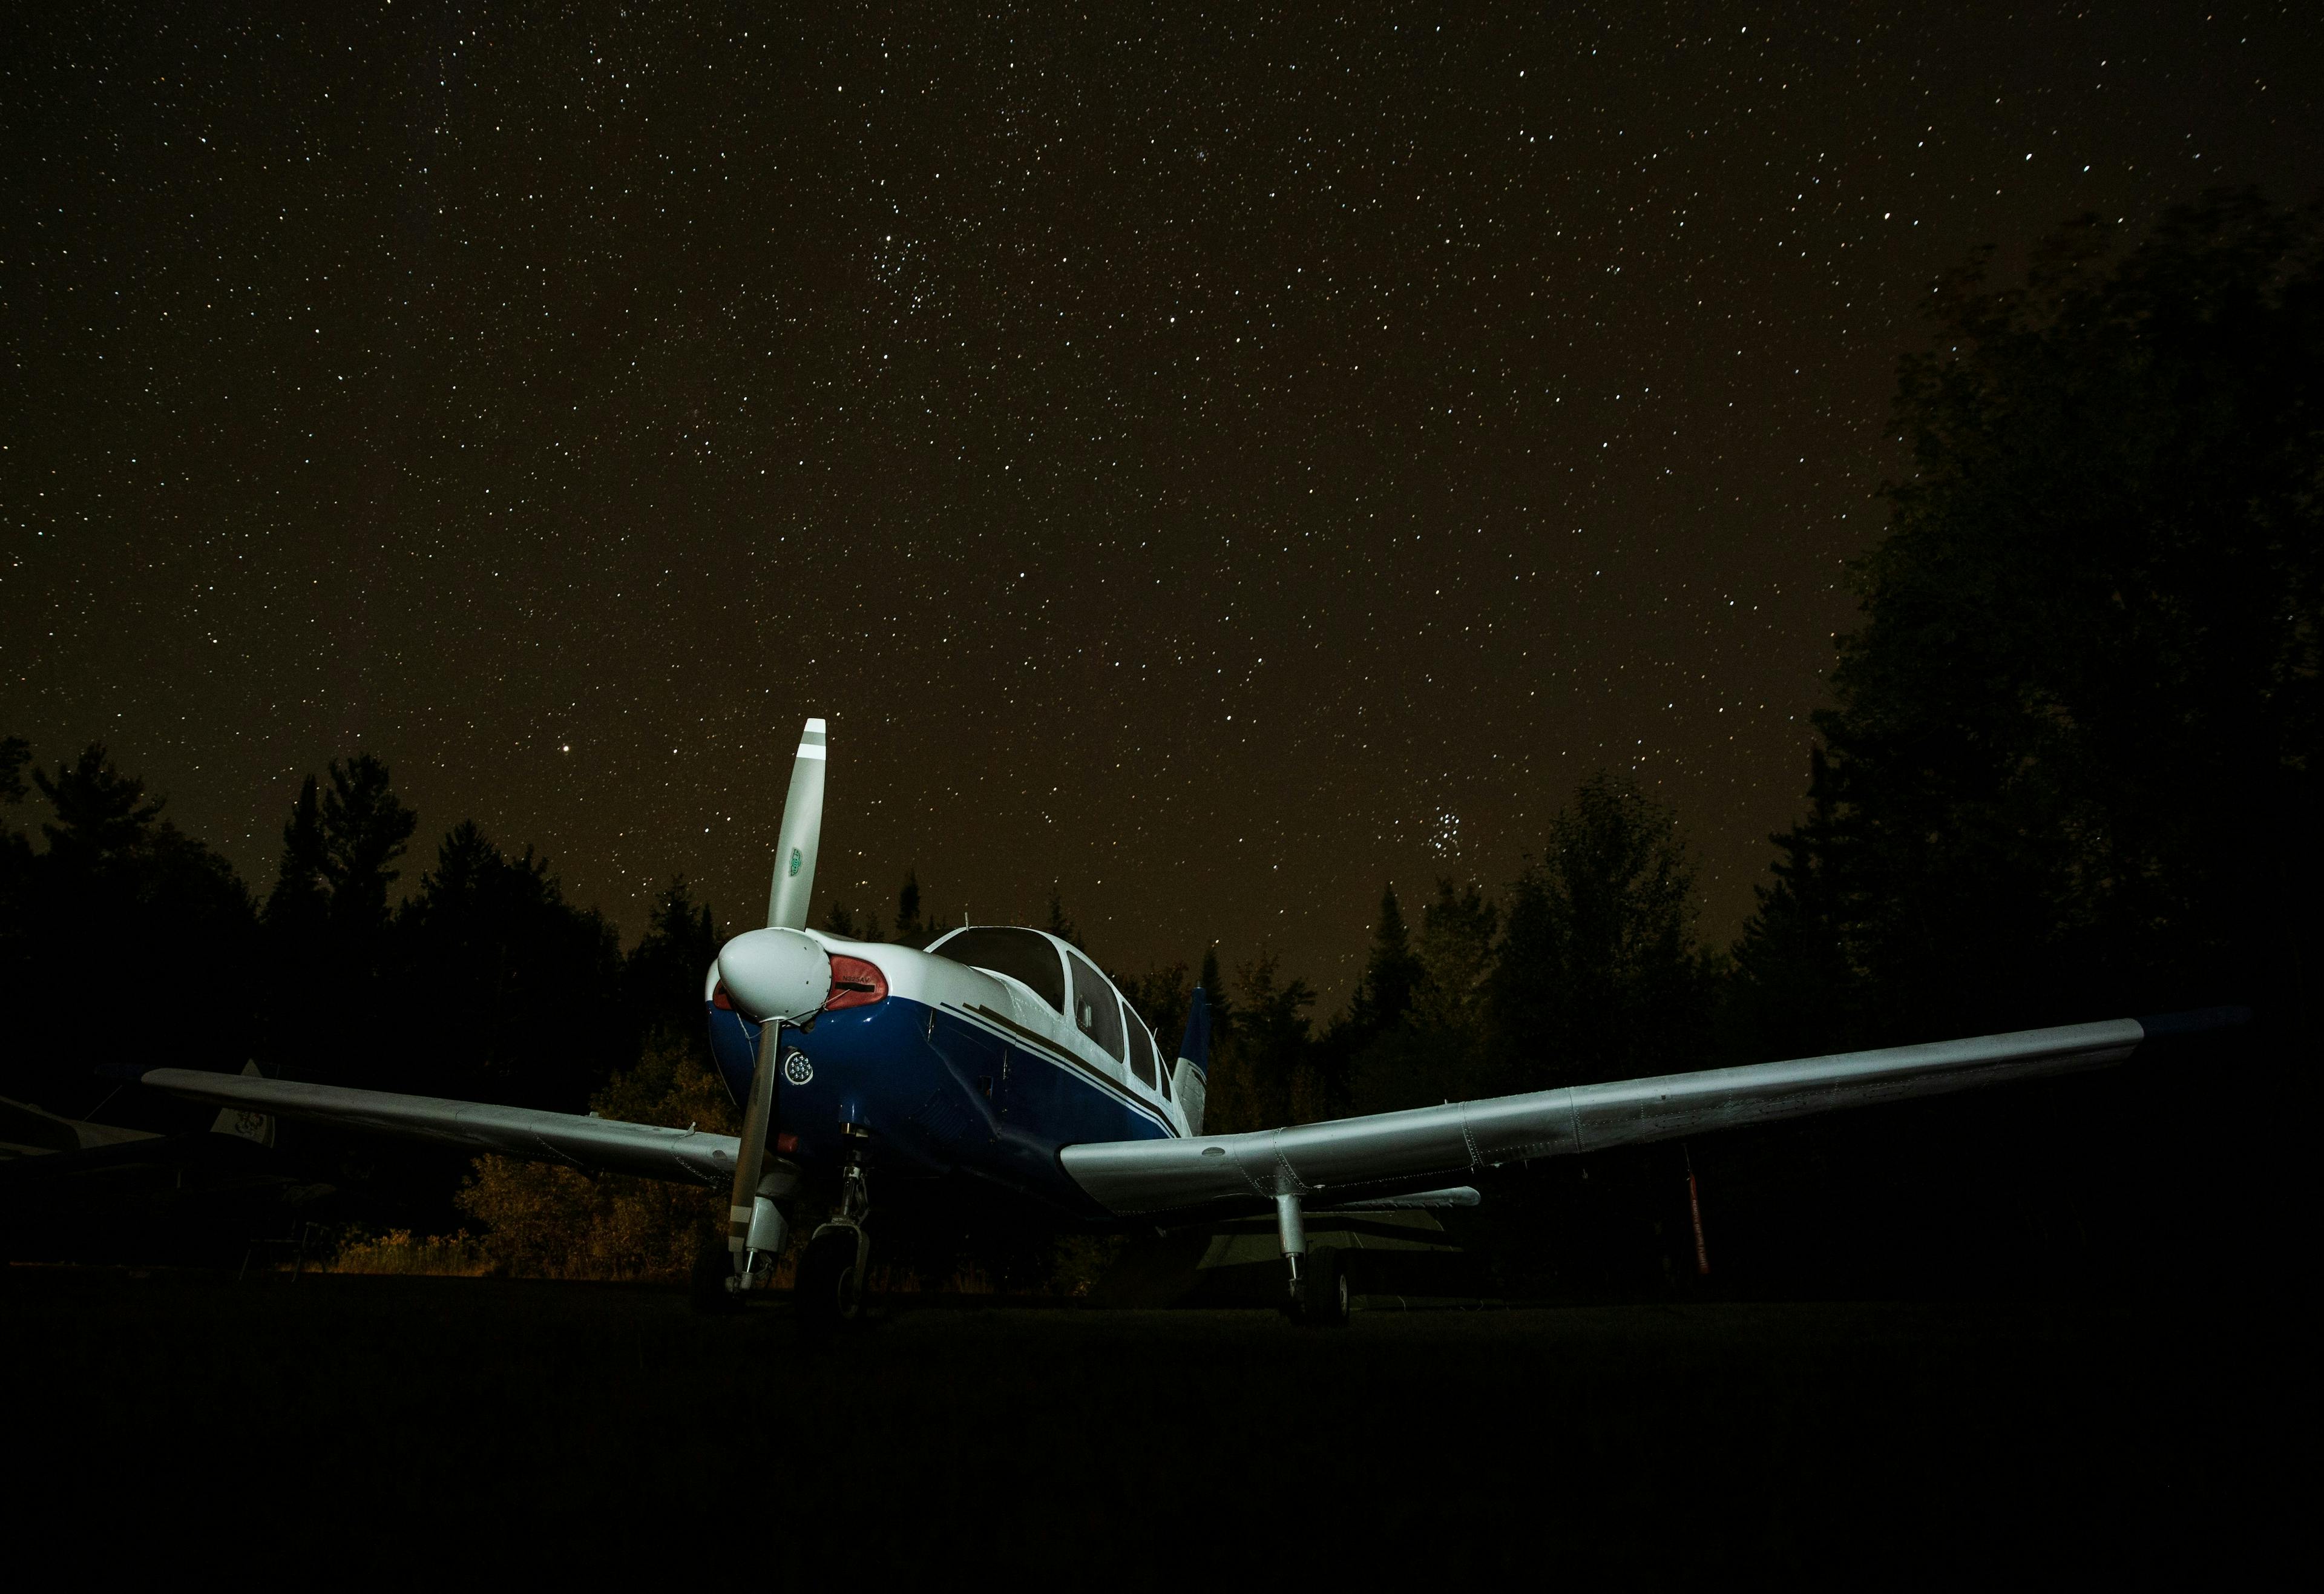 An aeroplane parked under a starry night sky with a couple trees behind it (Photo by Kristina Delp on Unsplash)